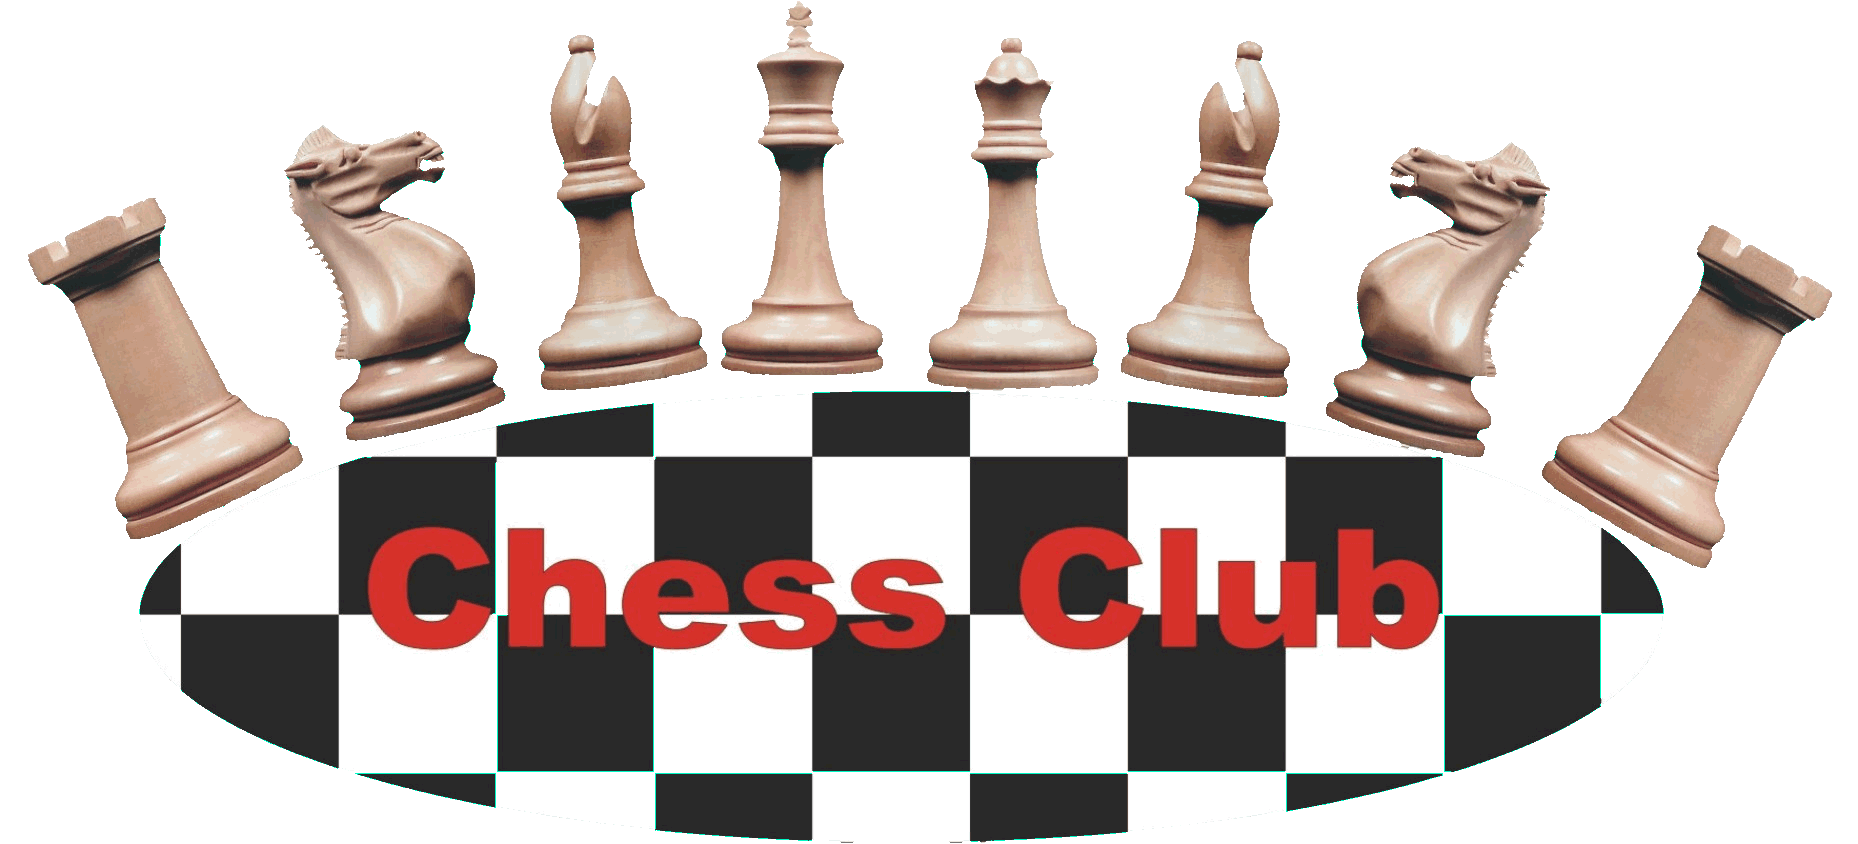 Clubs organizations chess . Club clipart middle school